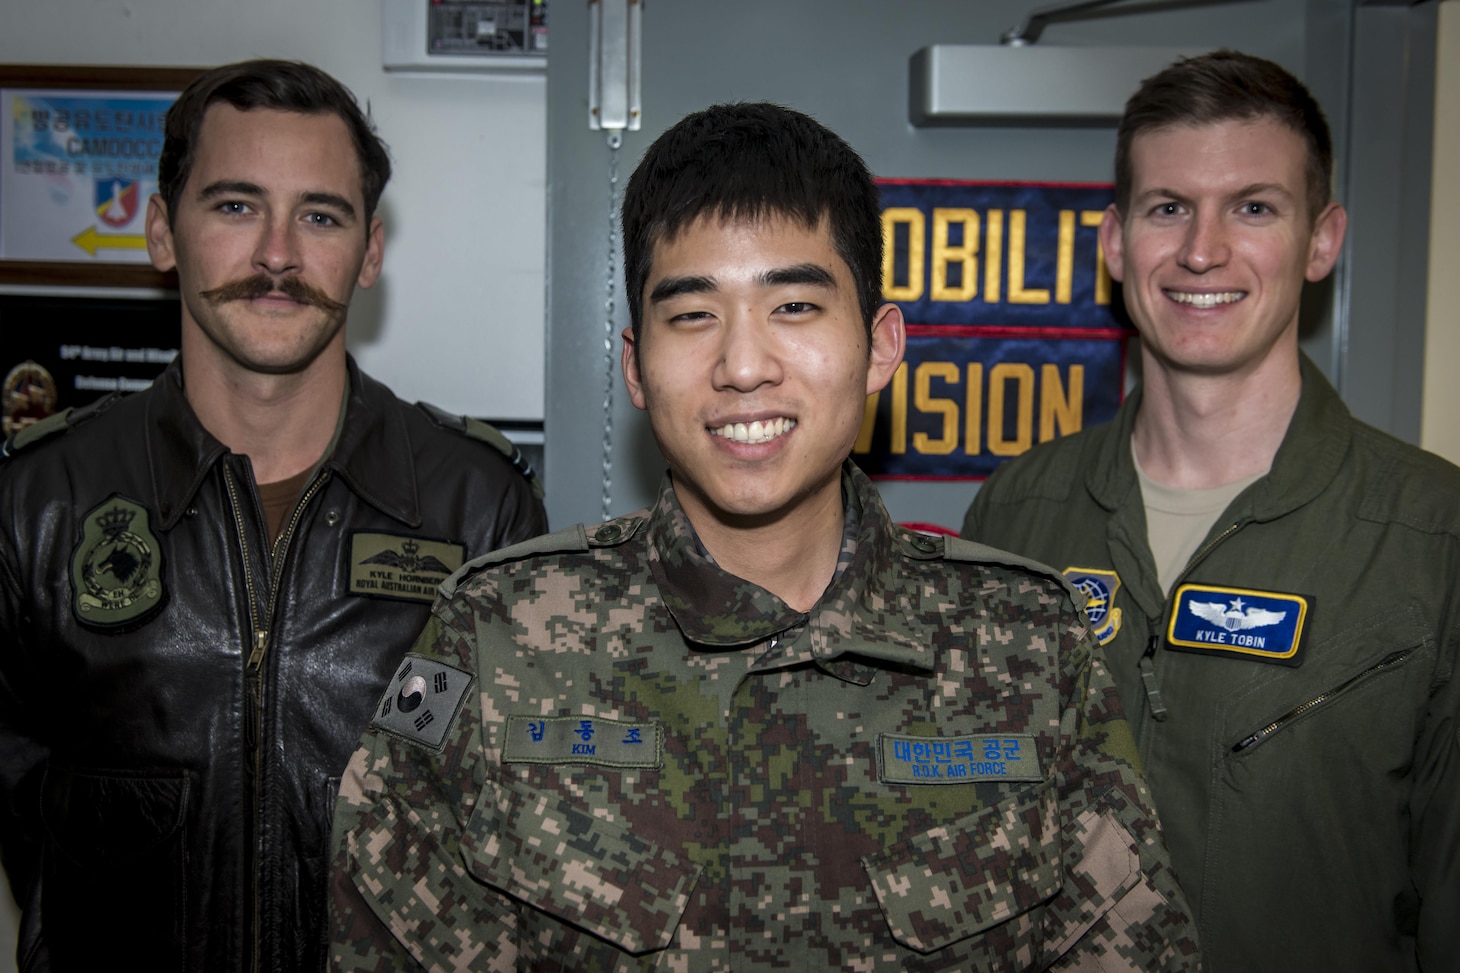 Royal Australian Air Force Flt. Lt. Kyle Hornberg, left, Republic of Korea Air Force 2nd Lt. Dongjo Kim, center, and U.S. Air Force Maj. Kyle Tobin, right, pose for a photo near their workstations in the Korean Air Operations Center at Osan Air Base, Republic of Korea, March 22, 2017. The three work together in the Air Mobility Division ensuring timely airlift support for all Key Resolve 2017 missions. Hornberg is the Air Mobility Division Multinational Coordination Center liaison officer with the Air Mobility Control Center at Royal Australian Air Force Base Richmond, Australia, Kim is an interpreting officer with the Air Component Command’s join plans and coordination division at Osan AB, and Tobin is with the 621st Air Mobility Squadron at Joint Base McGuire-Dix-Lakehurst, New Jersey. (U.S. Air Force photo by Staff Sgt. Benjamin W. Stratton)